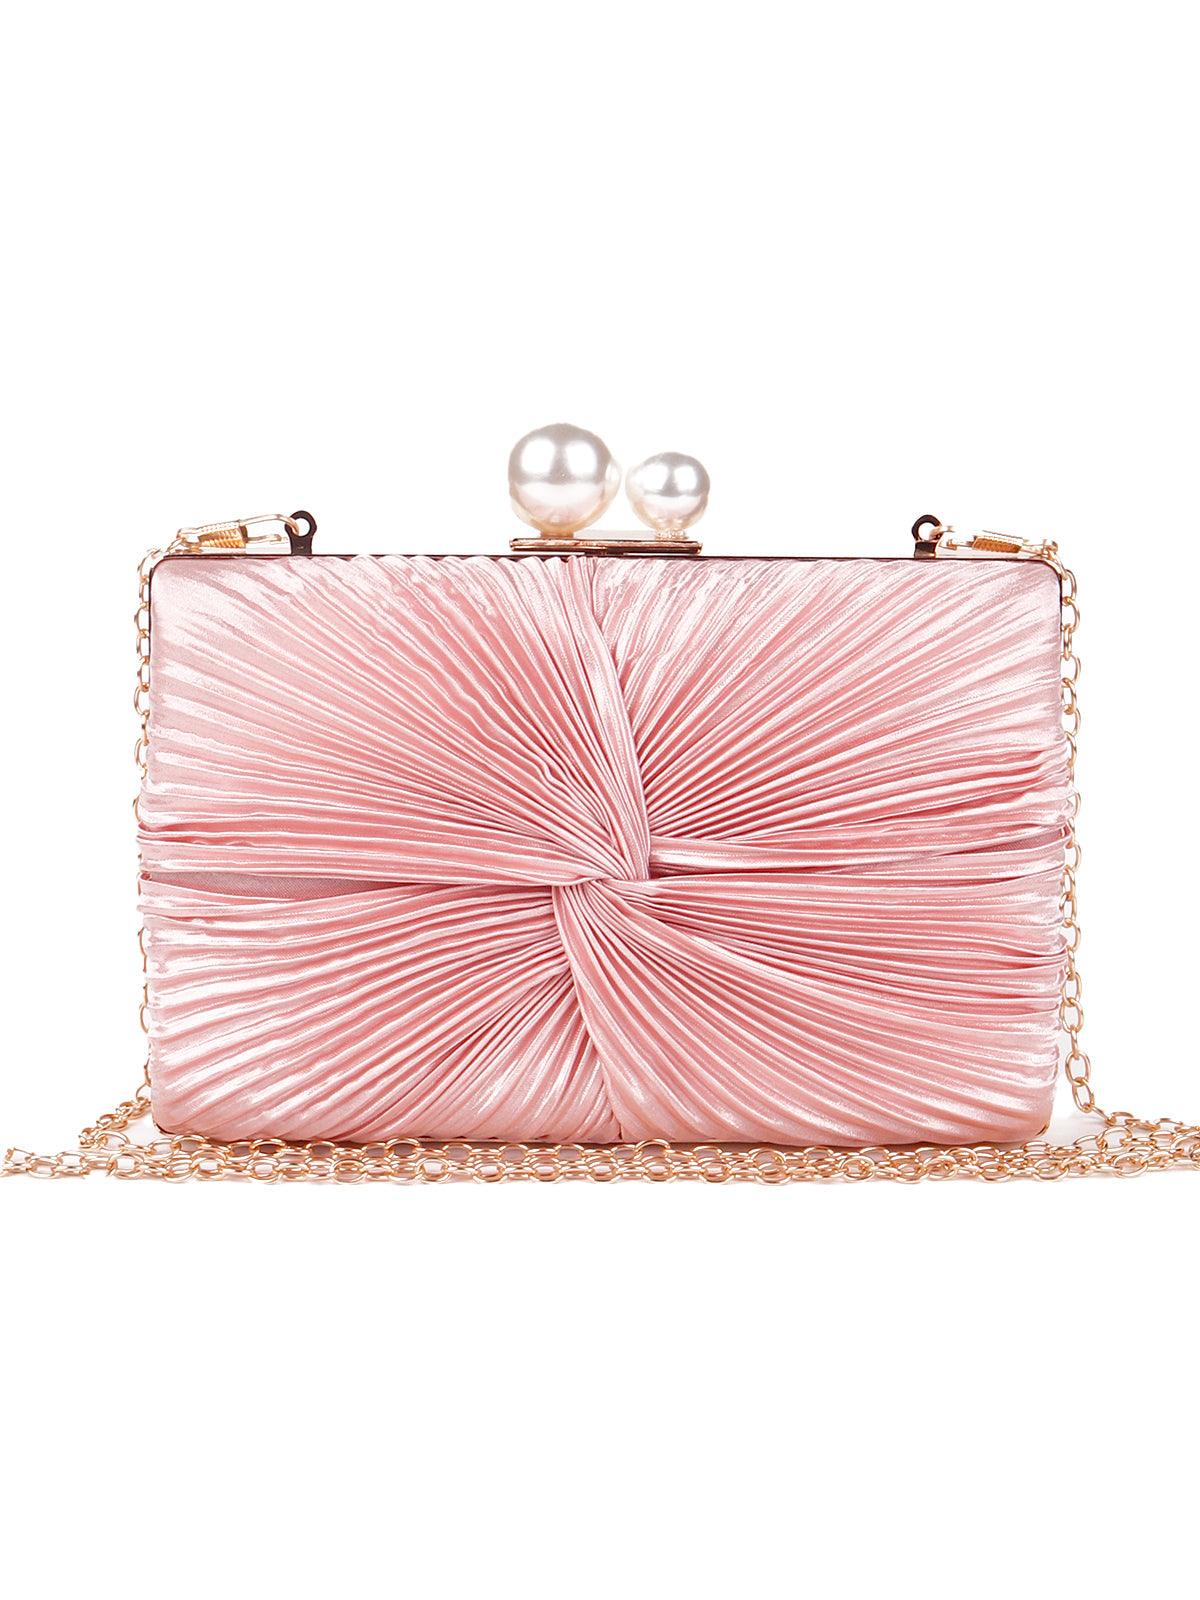 Baby pink pleated sling bag for women - Odette